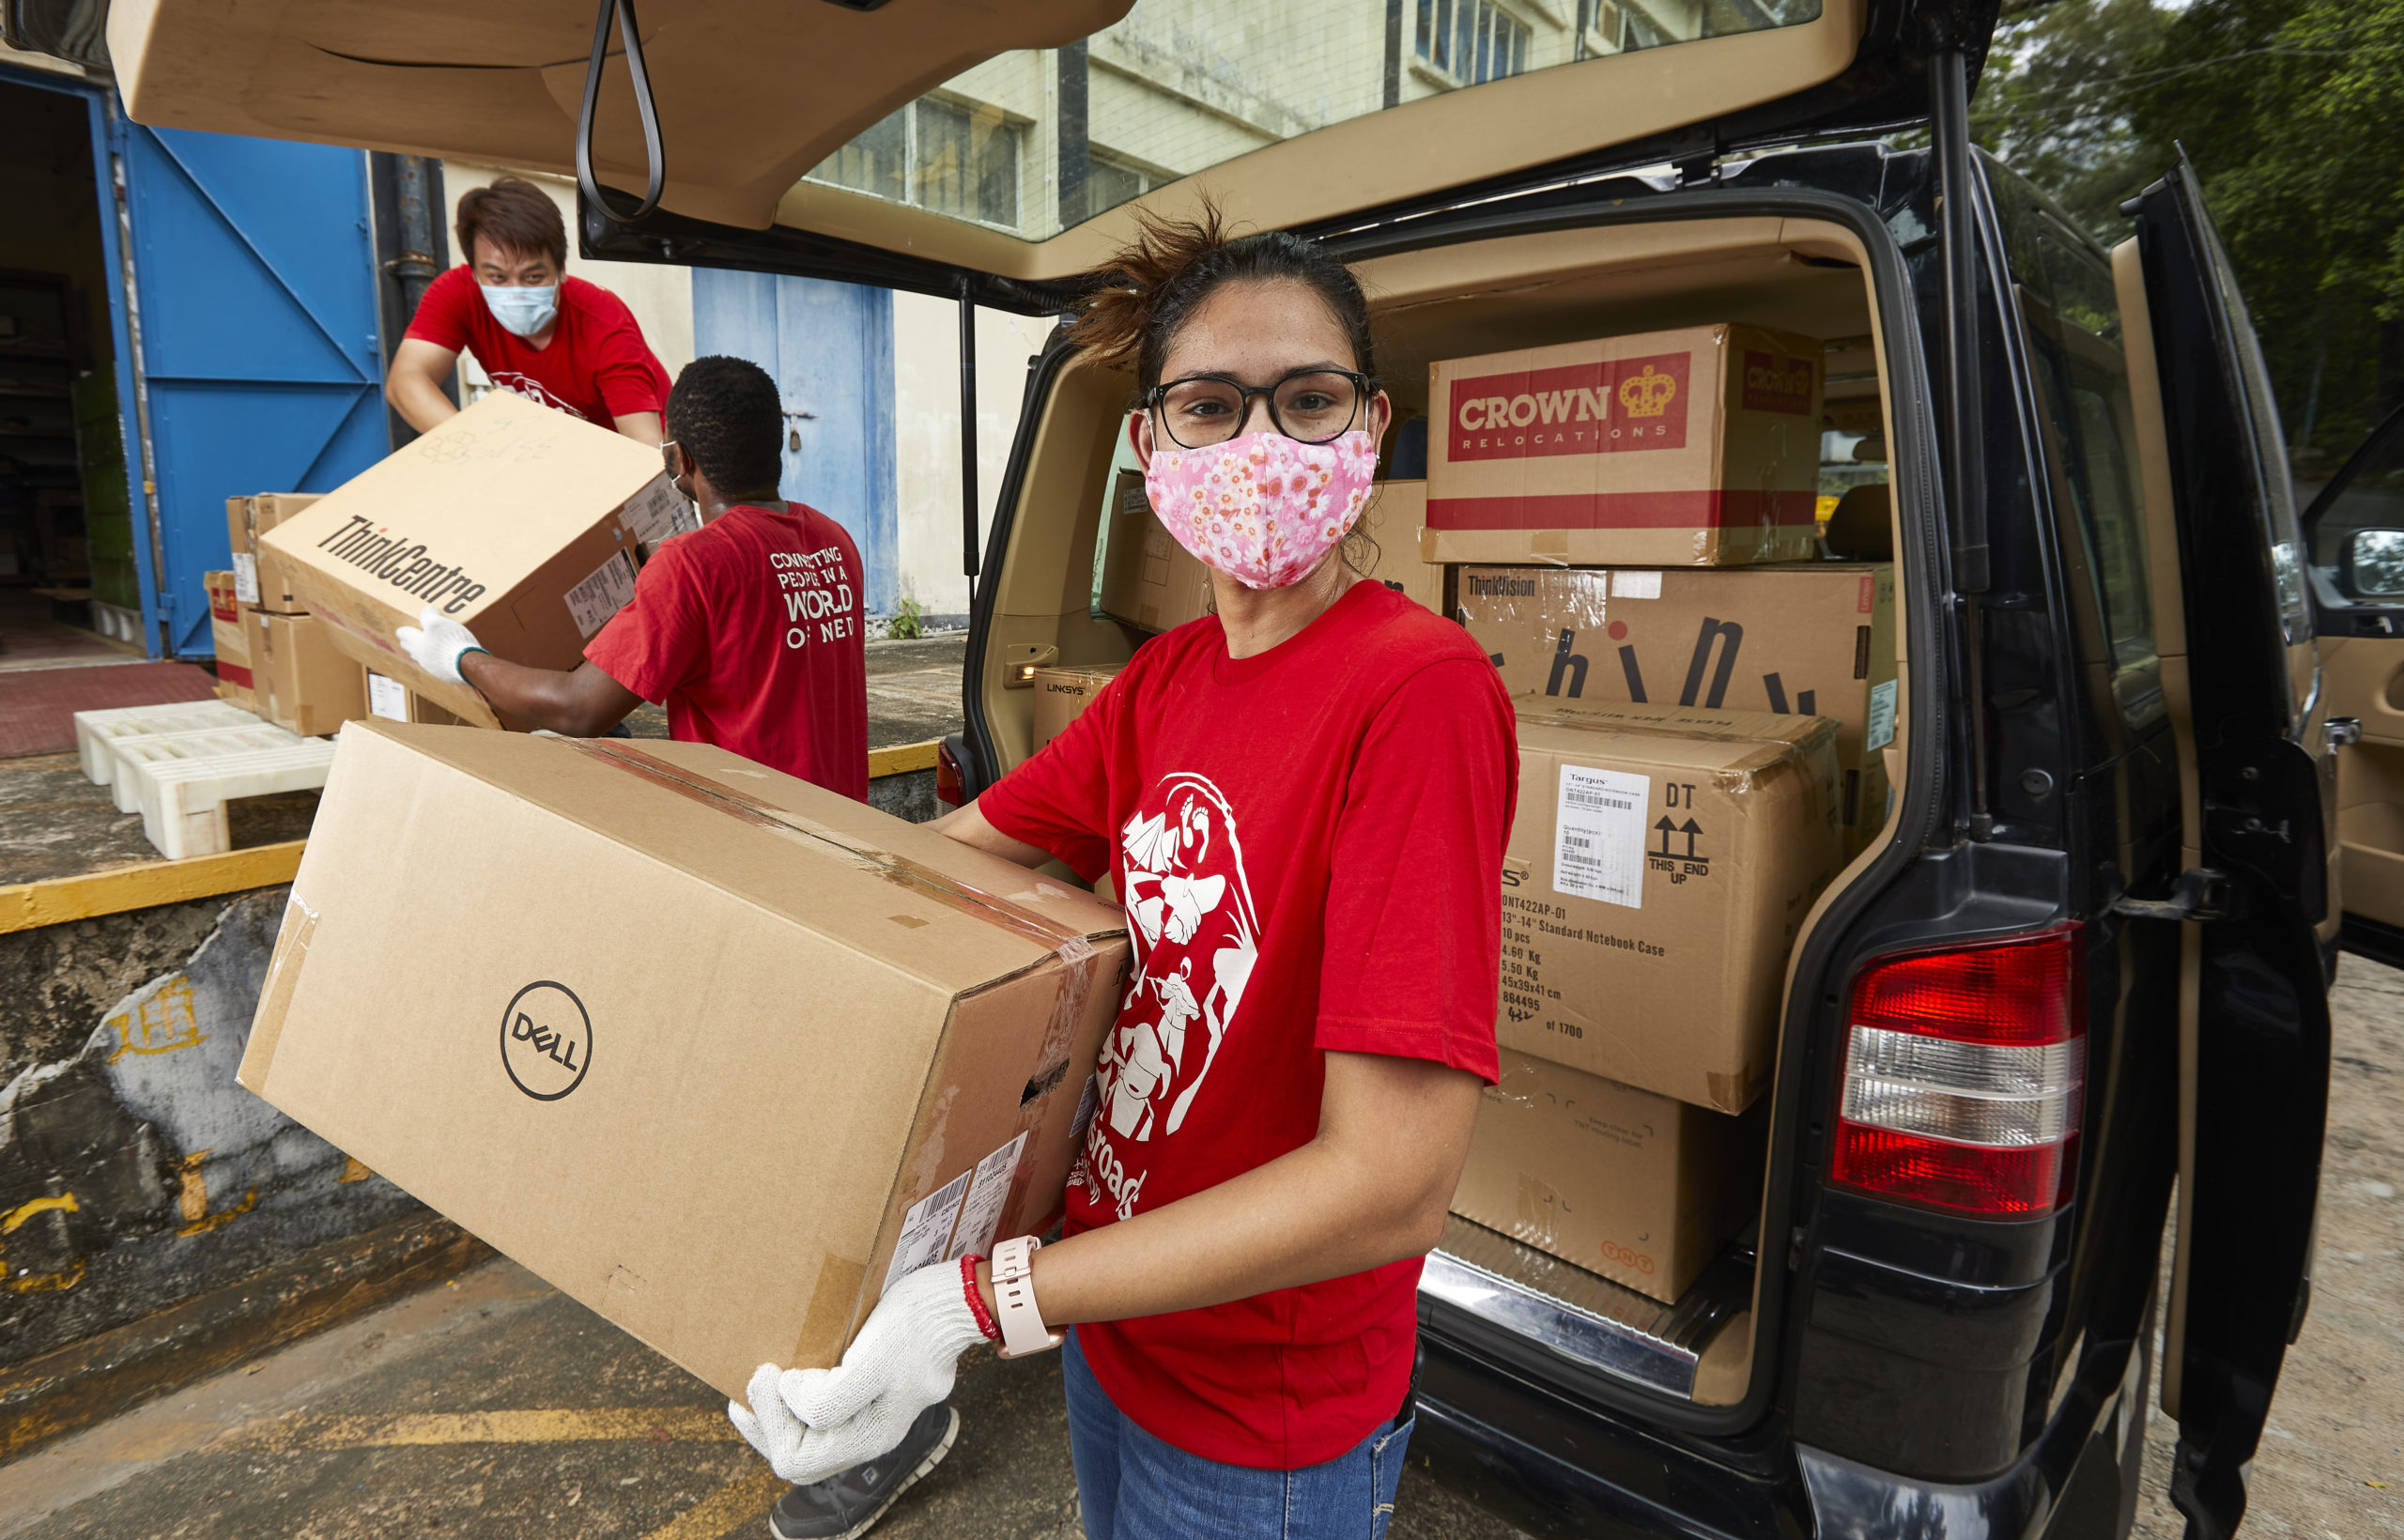 A woman wearing a face mask moves a box from the back of a van.